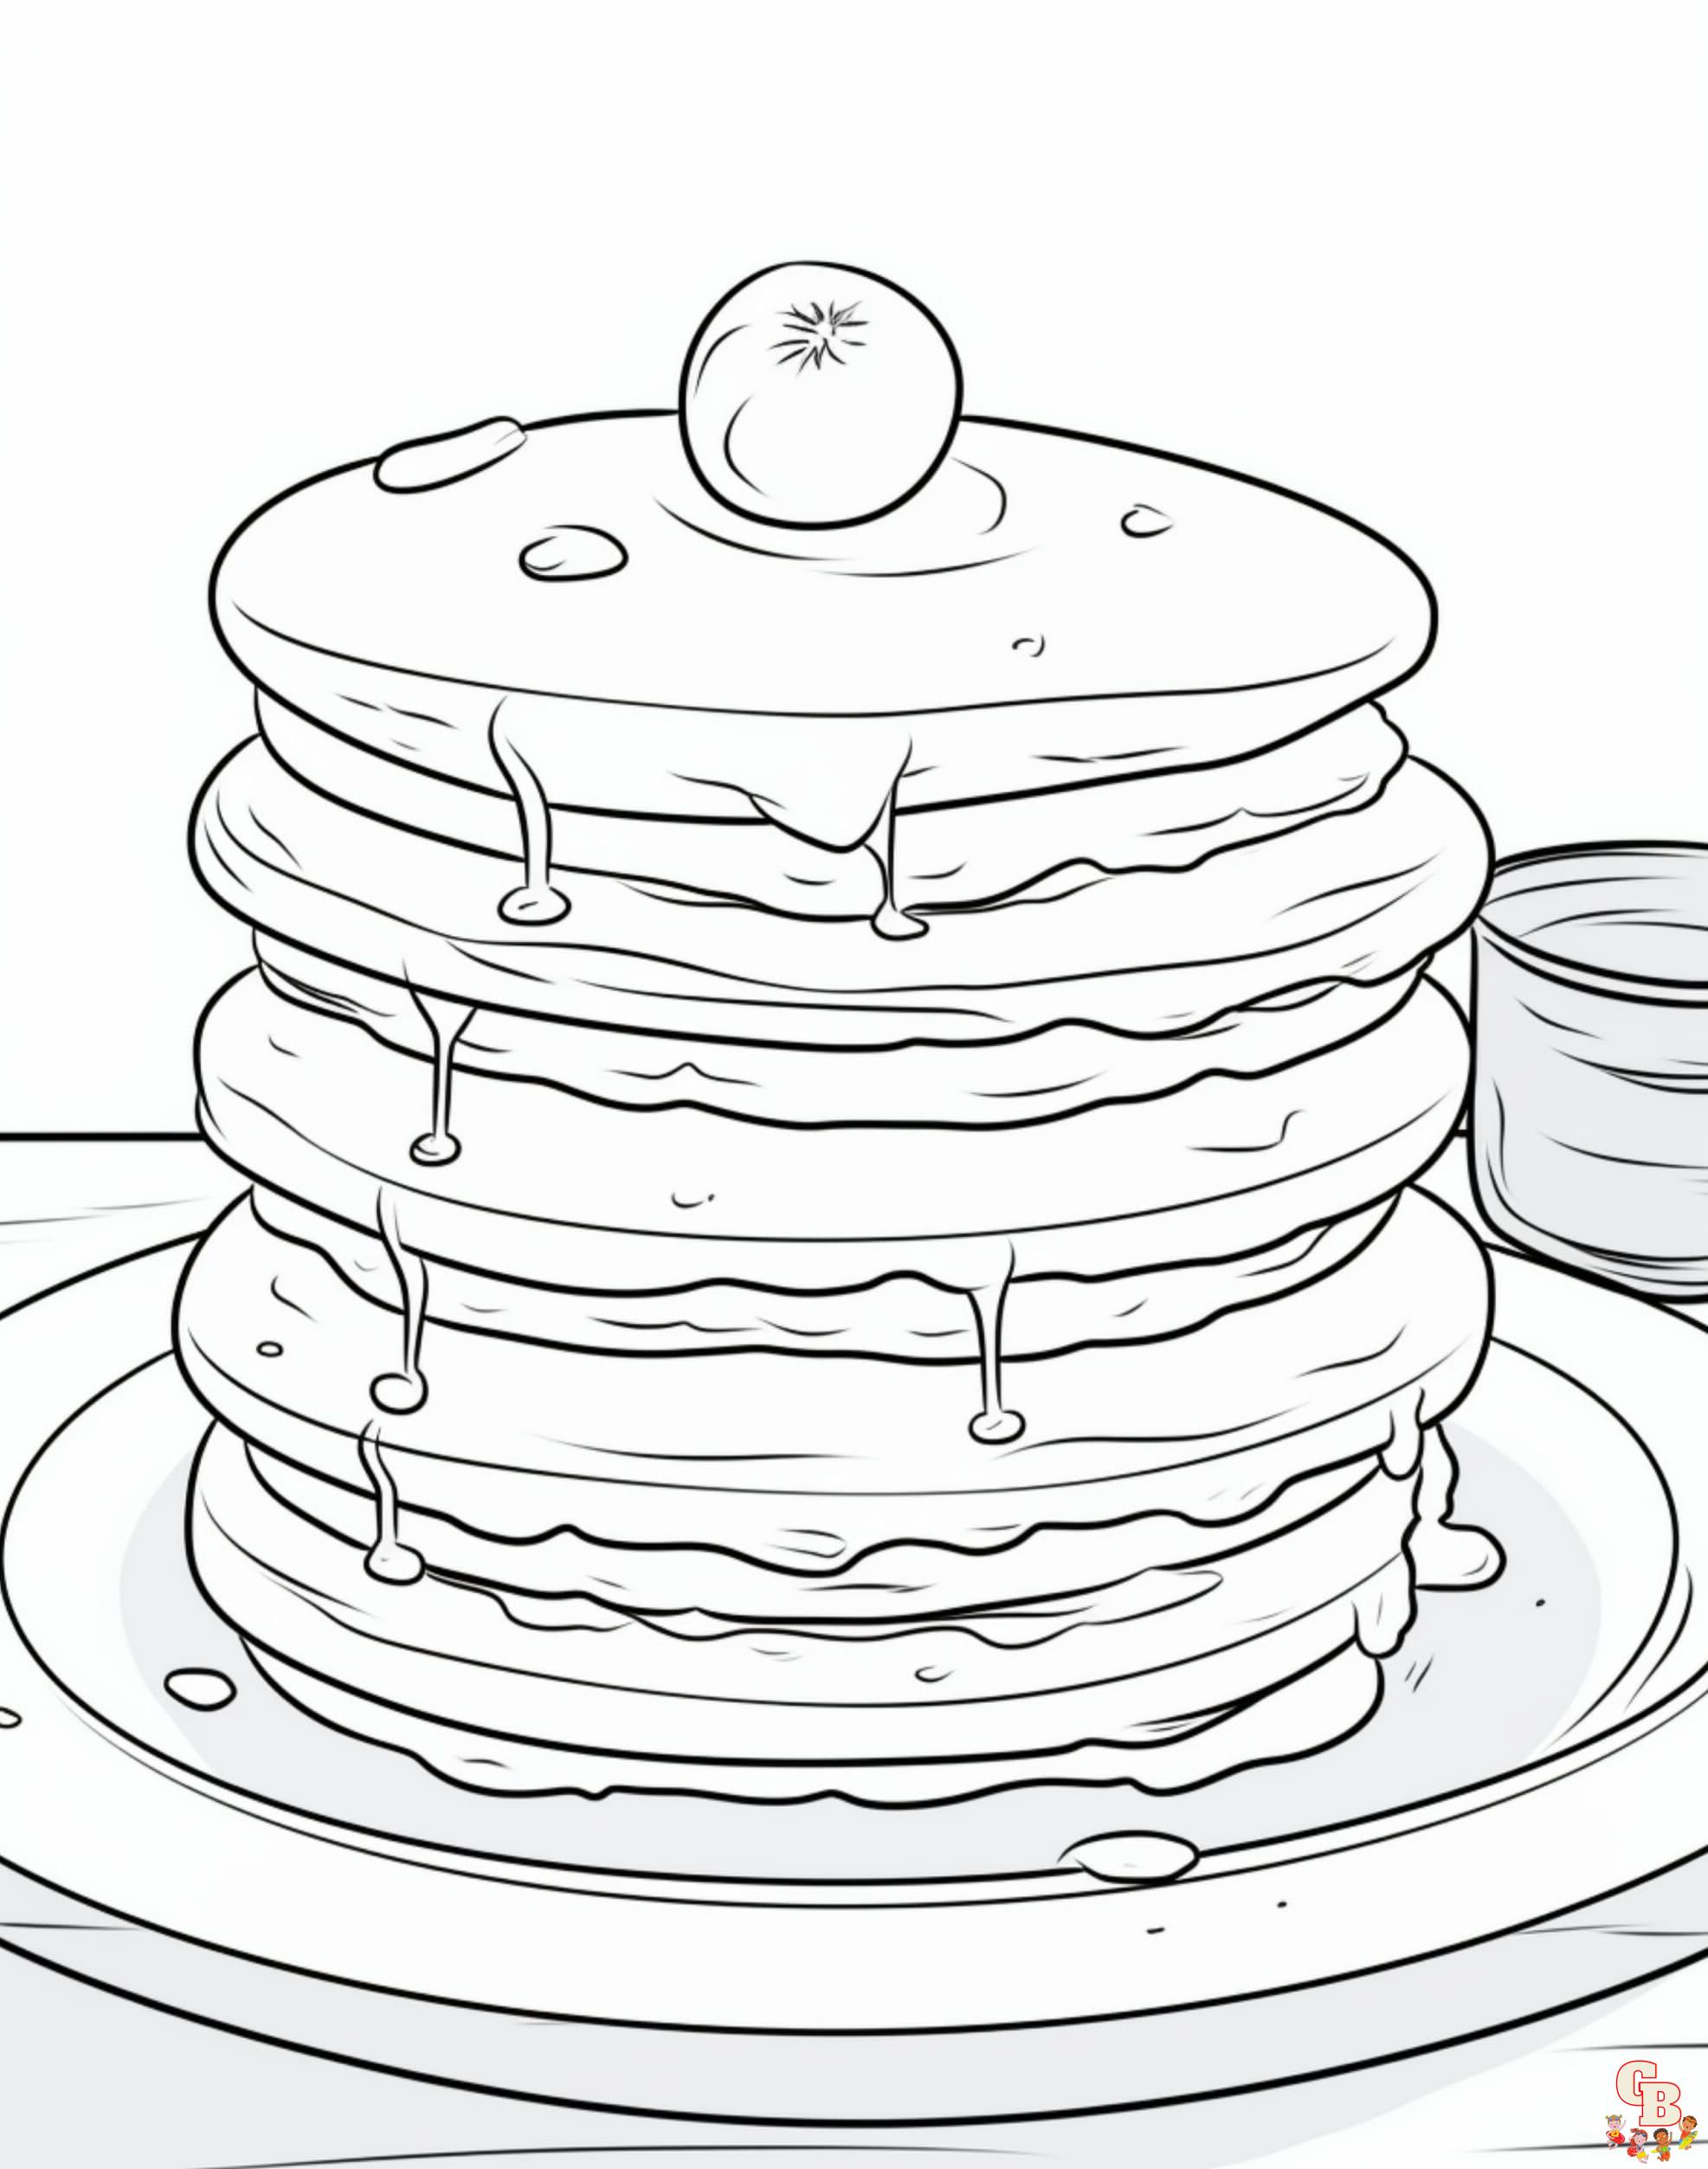 Printable Breakfast Coloring Pages Free For Kids And Adults